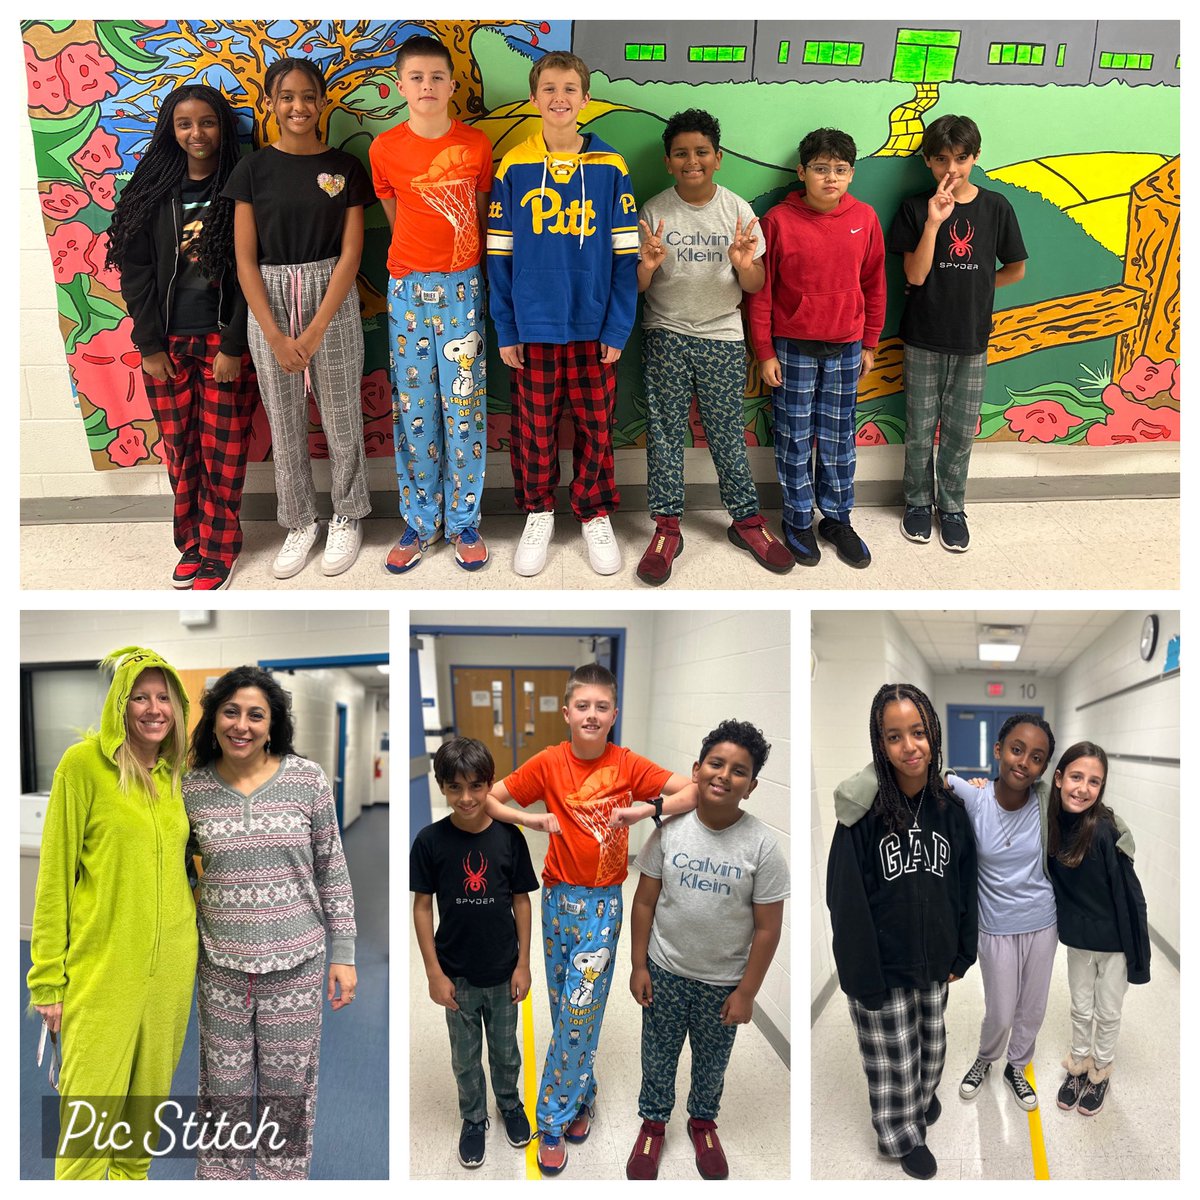 Today is pajama day to kick off #DigitalCitizenshipWeek! It’s important to take screen breaks, especially before bed. Did you know the blue light from screens can disrupt sleep cycles and make it harder to stay asleep? Get a good night’s rest by powering down early. #FCPSDigCit